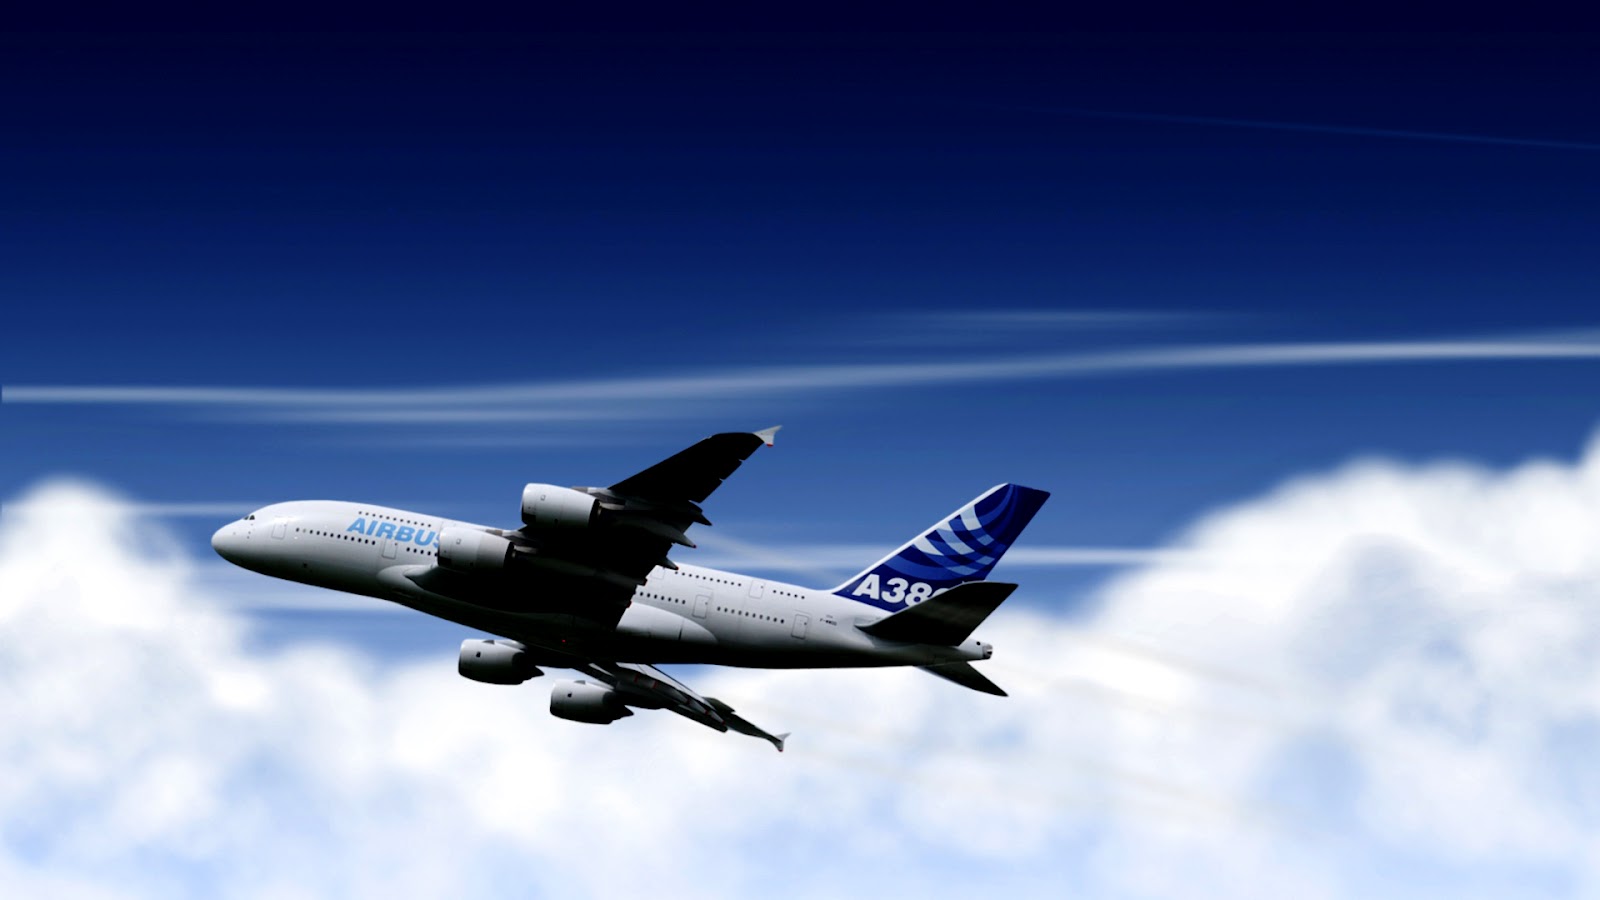 Airbus A380 Planes HD Wallpaper For Windows X Sms Forums